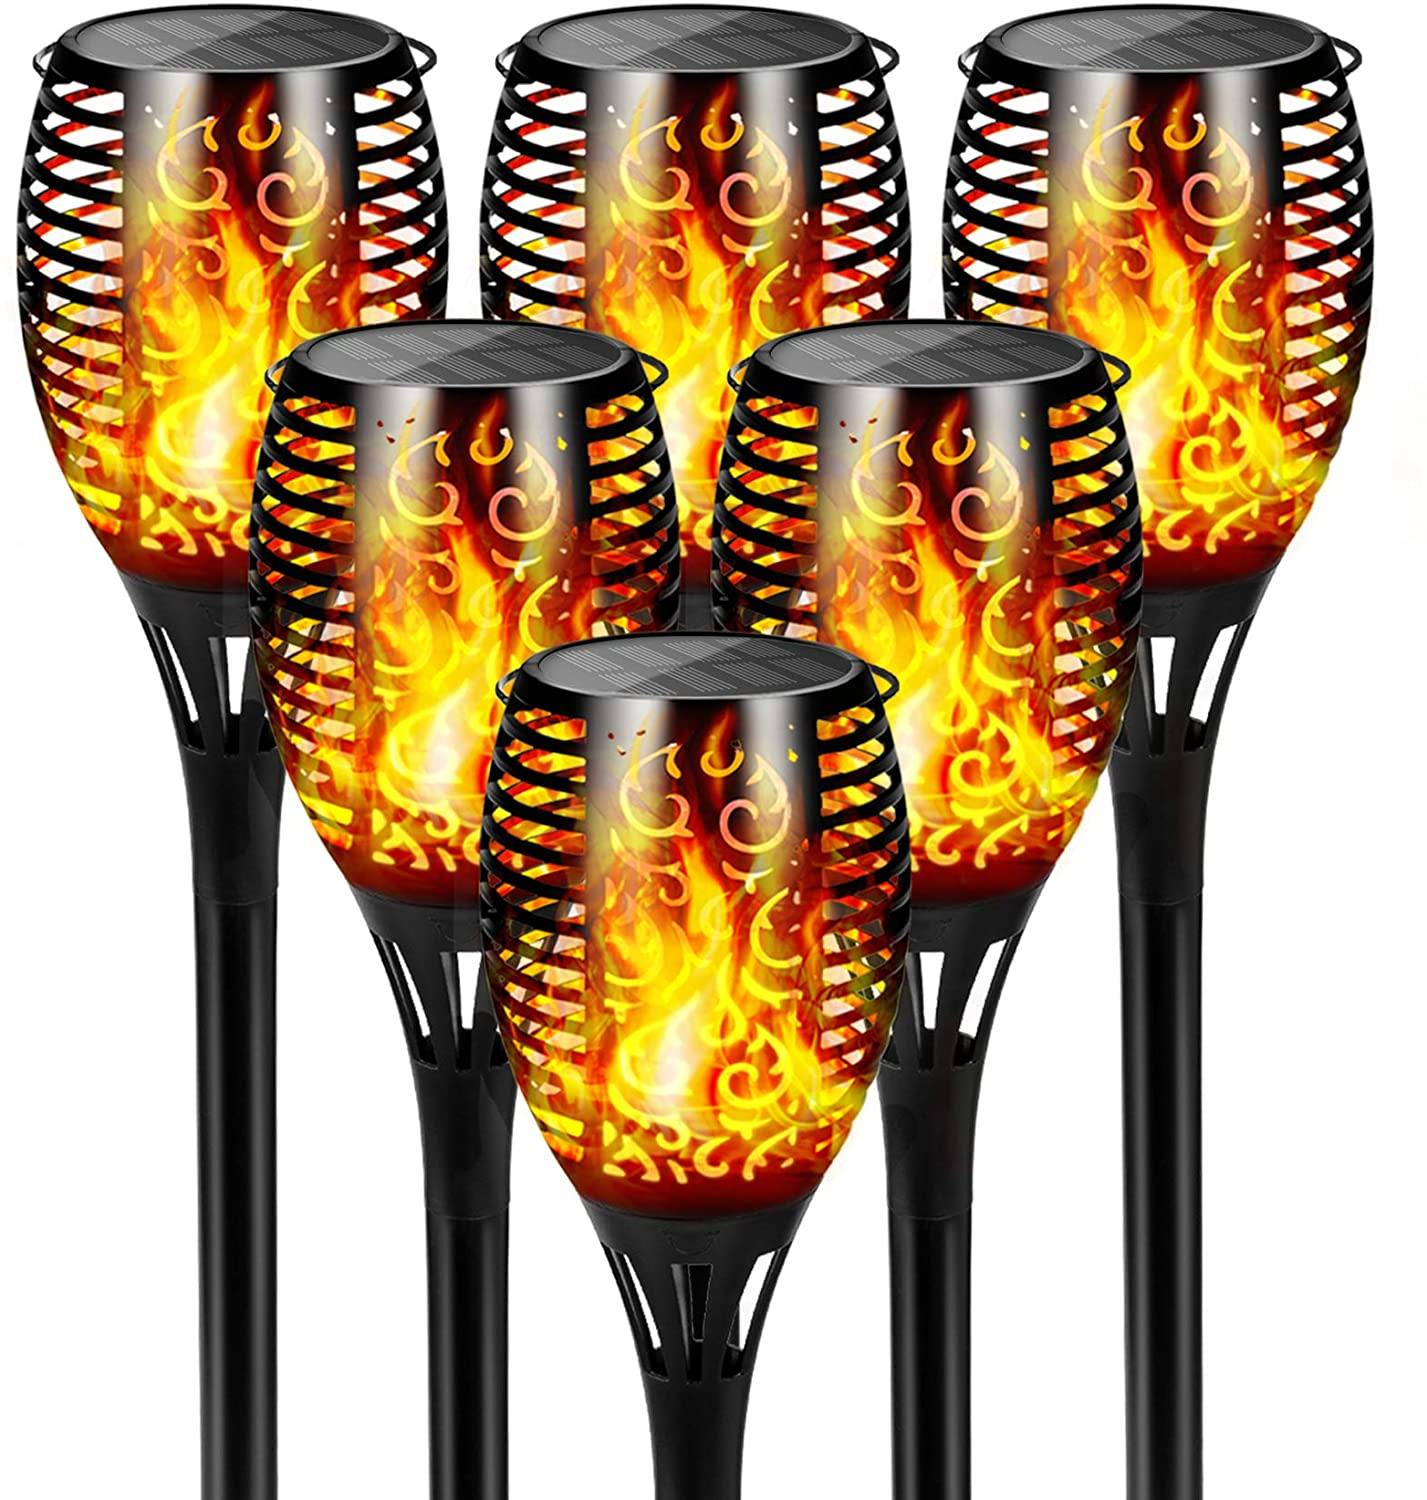 Best Solar Flame Flickering torch Lights For Sale